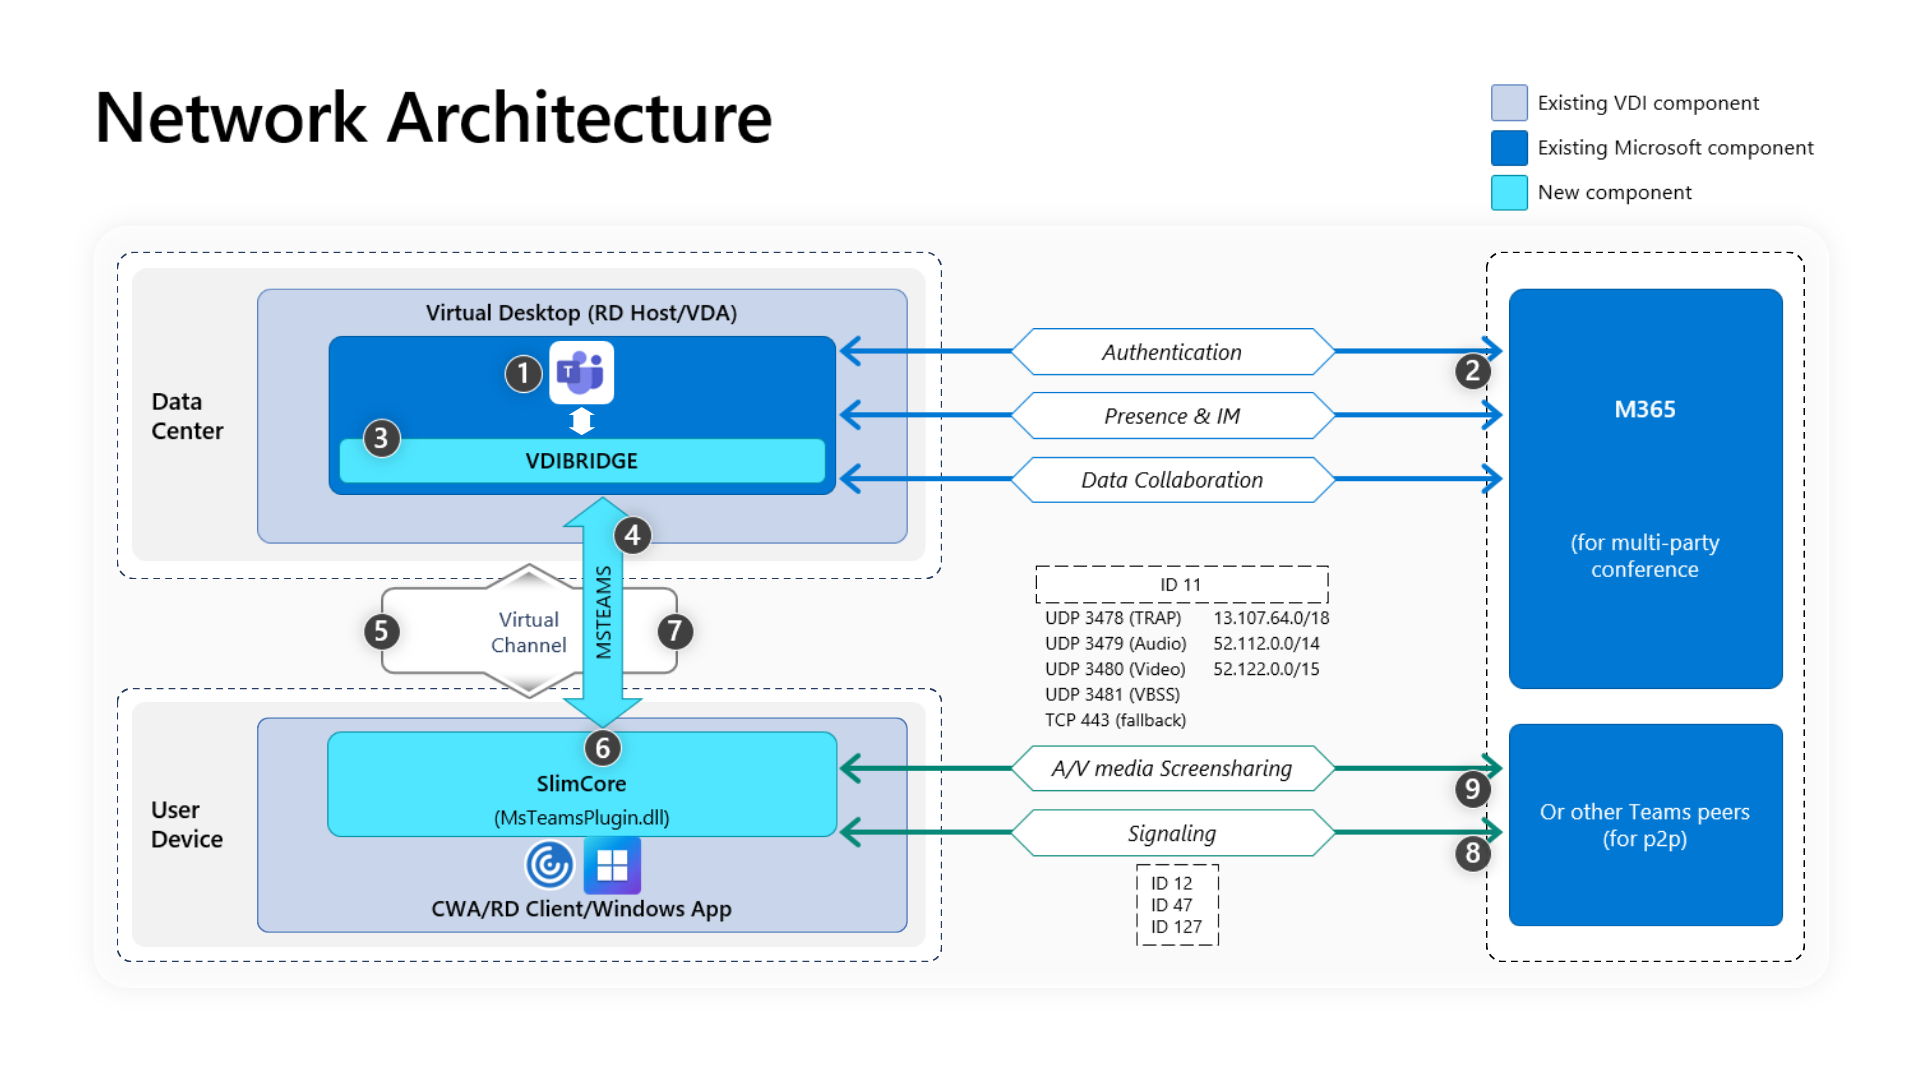 The network architecture of Teams VDI 2.